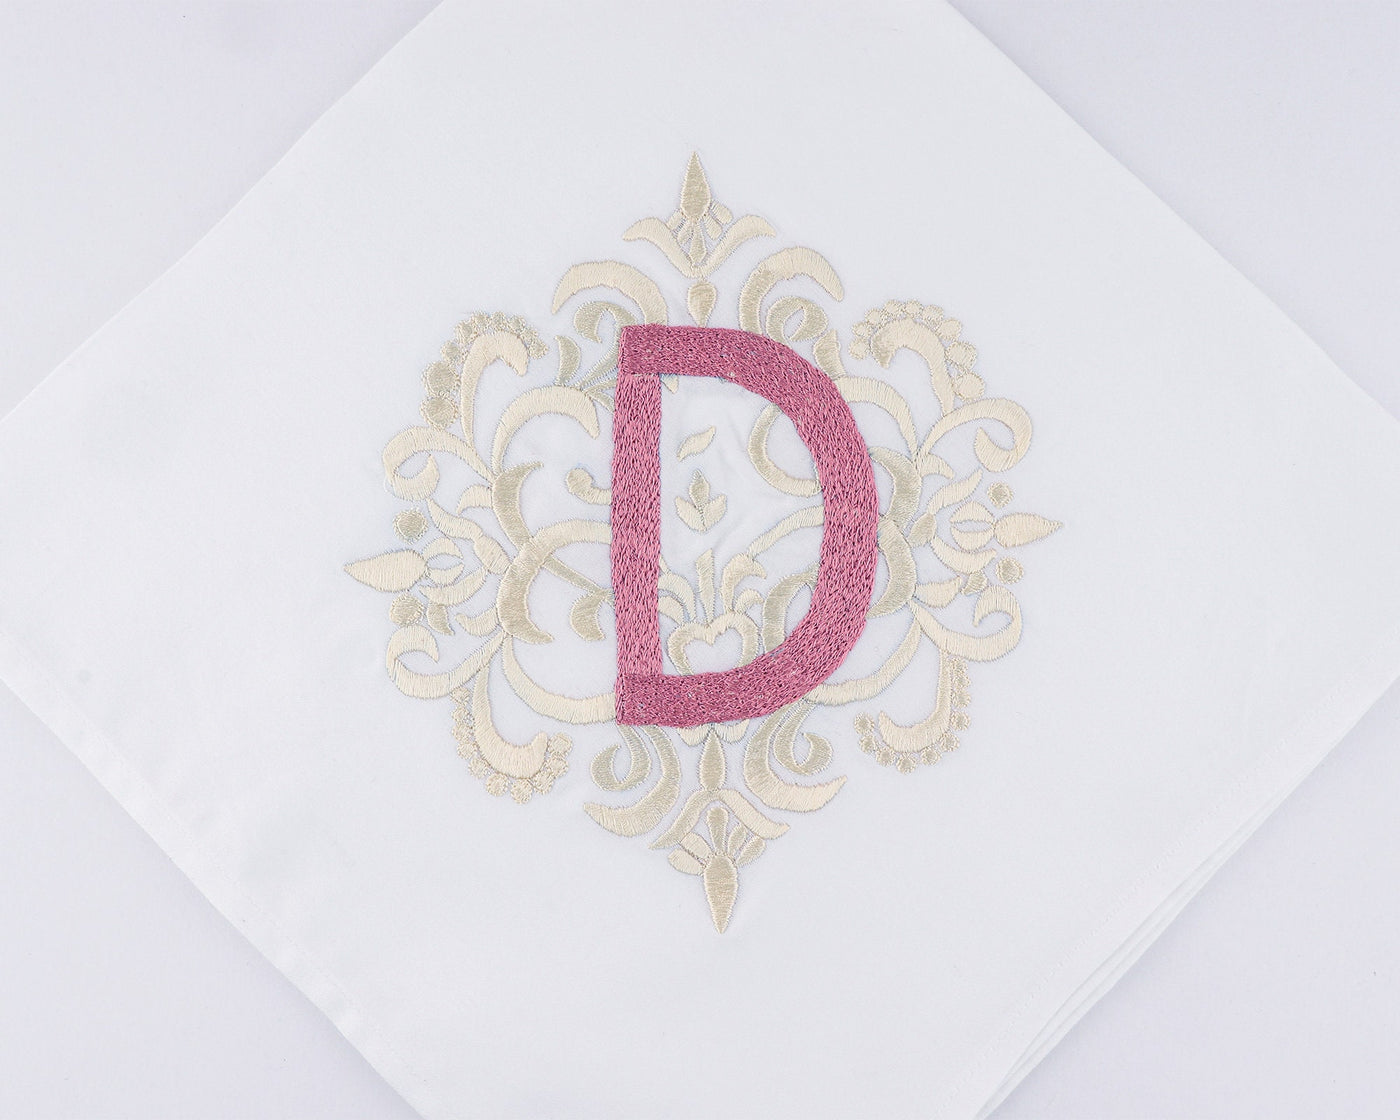 Fabricrush Personalized Cotton Embroidery Napkins for Anniversary, Wedding Couple Party Dinner Napkins